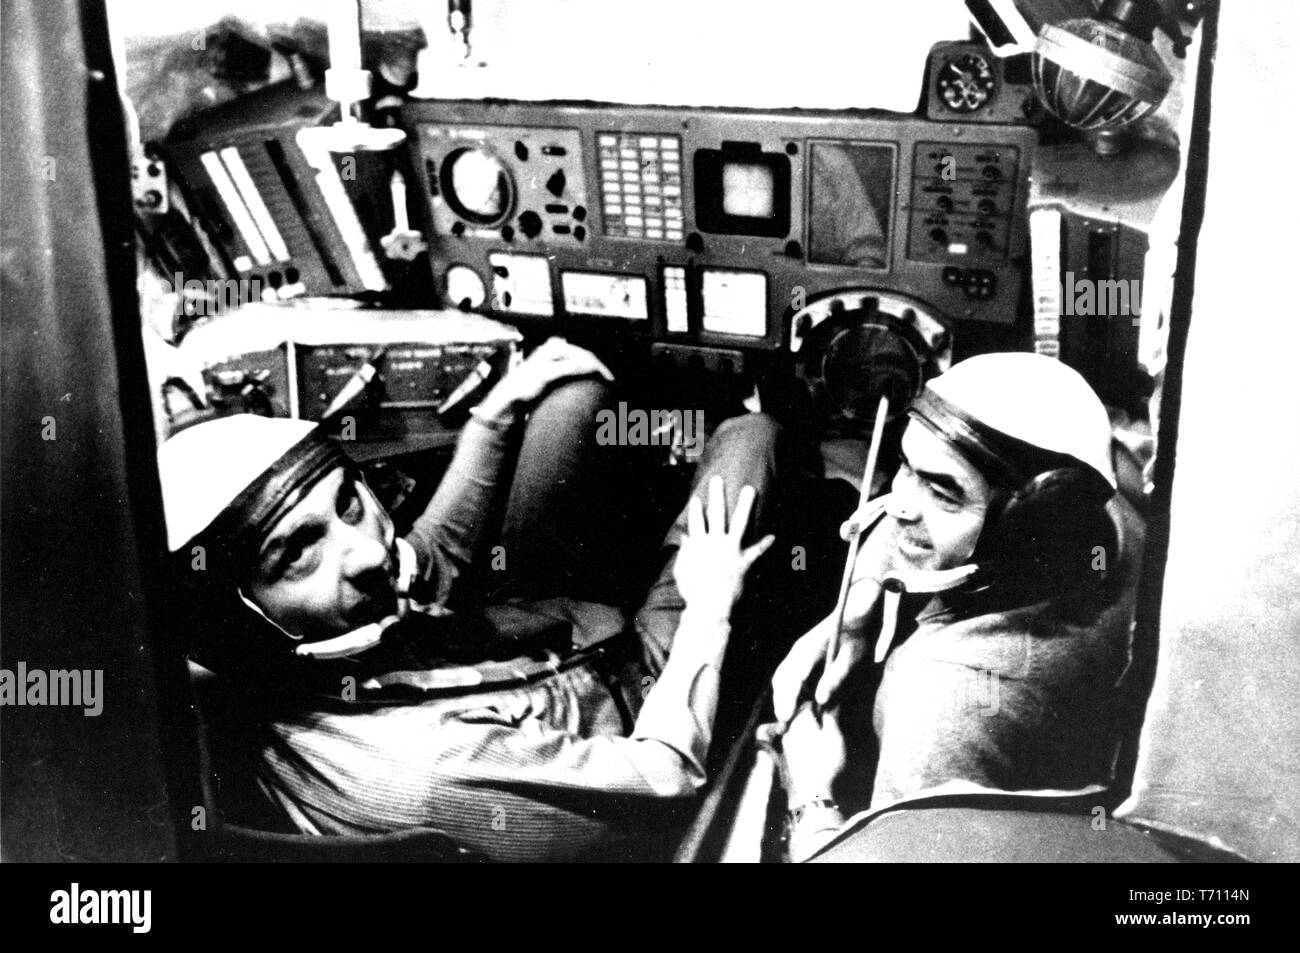 Photograph of Thomas P. Stafford and Andriyan G. Nikolayev in the Soyuz simulator, the Apollo-Soyuz Test Project (ASTP), Moscow, Russia, October 17, 1972. Image courtesy National Aeronautics and Space Administration (NASA). () Stock Photo